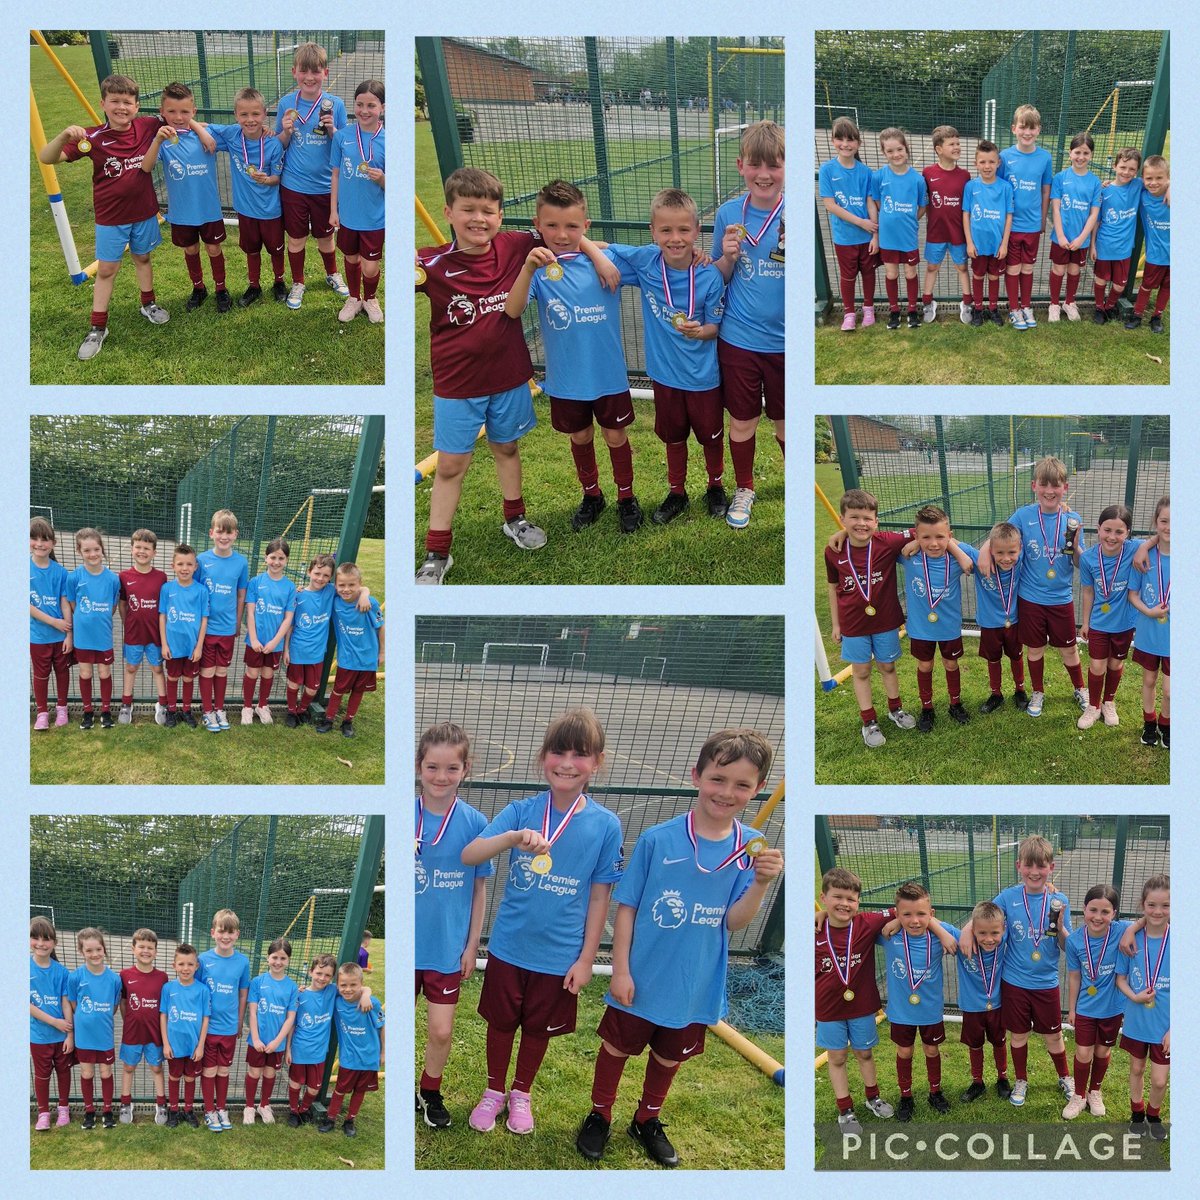 BIRDWELL PRIMARY Y3/4 HANDBALL GOLD MEDALISTS Super teamwork shown today to deliver the balls to the back of the net in every game - another trophy earned for the cabinet @PrimaryBirdwell @SgoHorizon @PE_KB